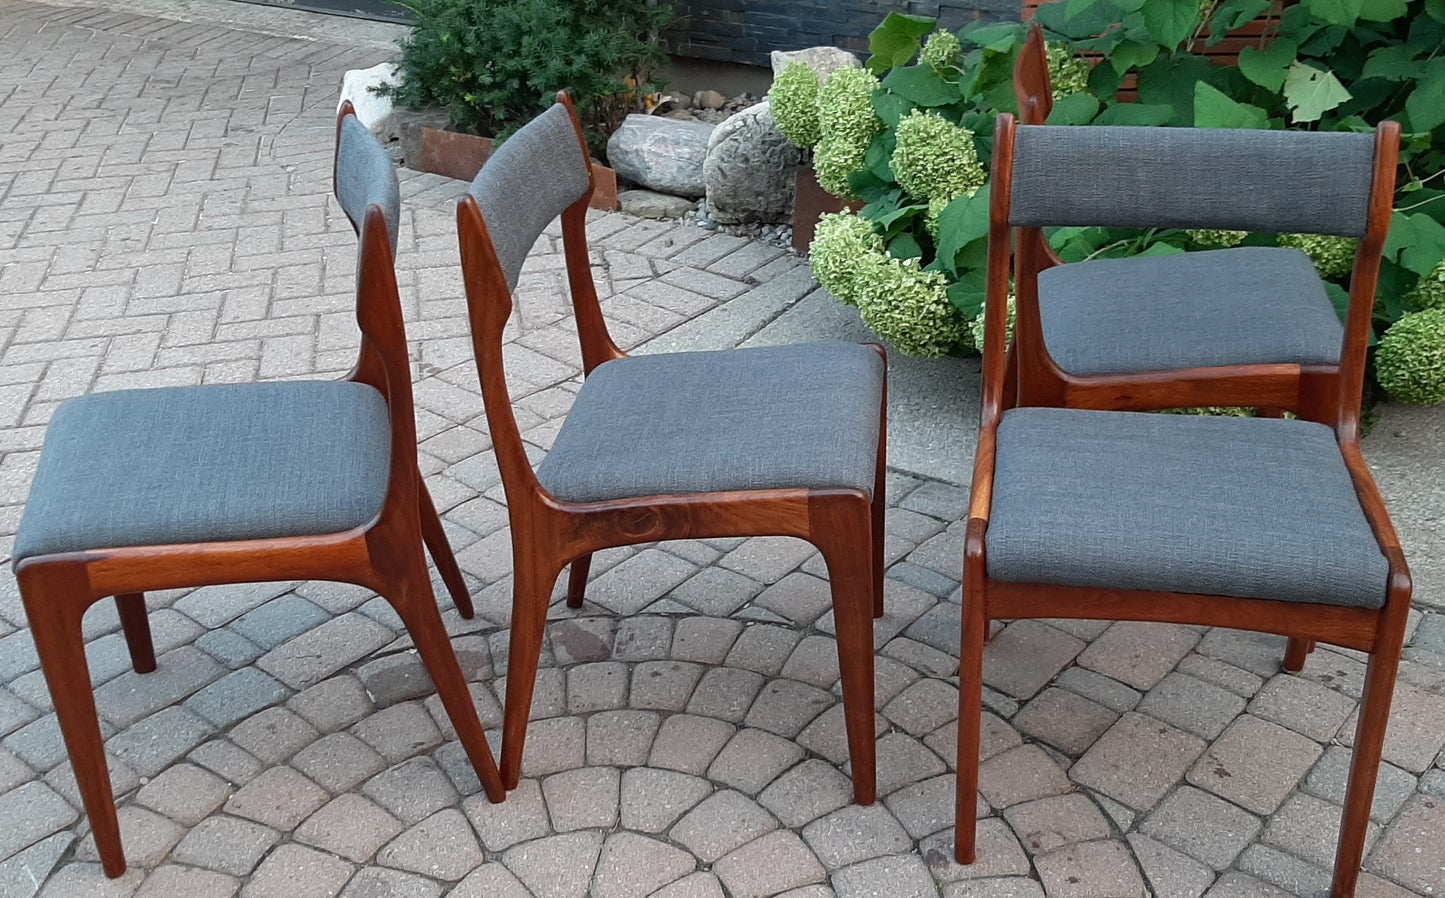 4 MCM Teak Chairs REFINISHED REUPHOLSTERED